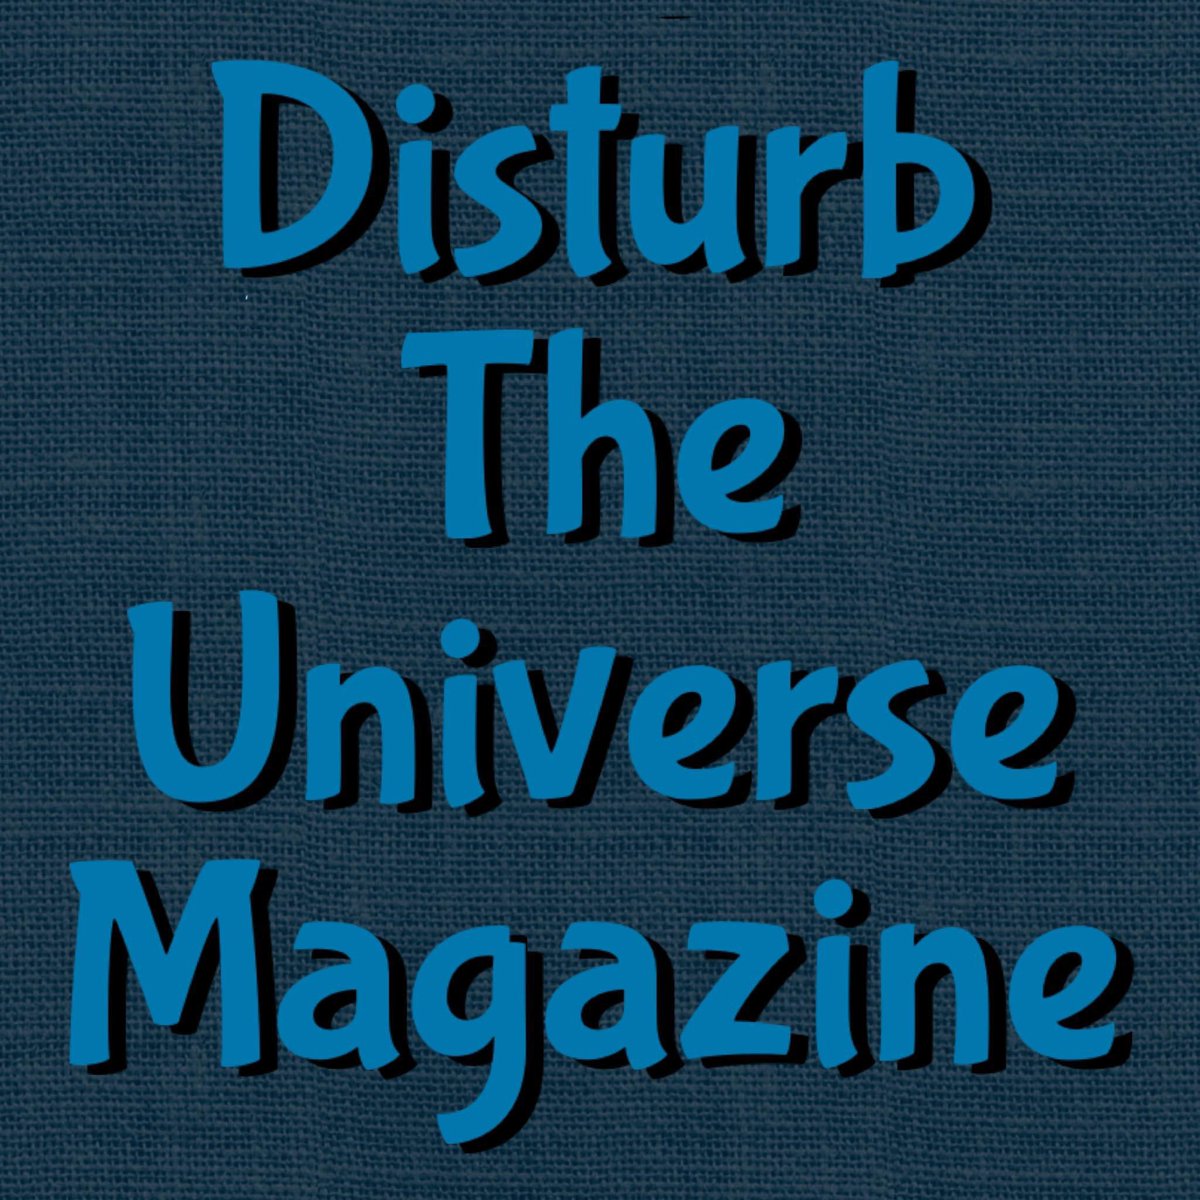 Up today at Disturb The Universe Magazine 

In Most Respects by Alan Abrams

disturbtheuniversemagazine.com/2024/04/in-mos…

#publishedwriting #writers #disturbtheuniversemagazine #published #writingcommunity #poetry #writing #publishedpoetry #poetrylovers #poetrytwitter #poetrycommunity